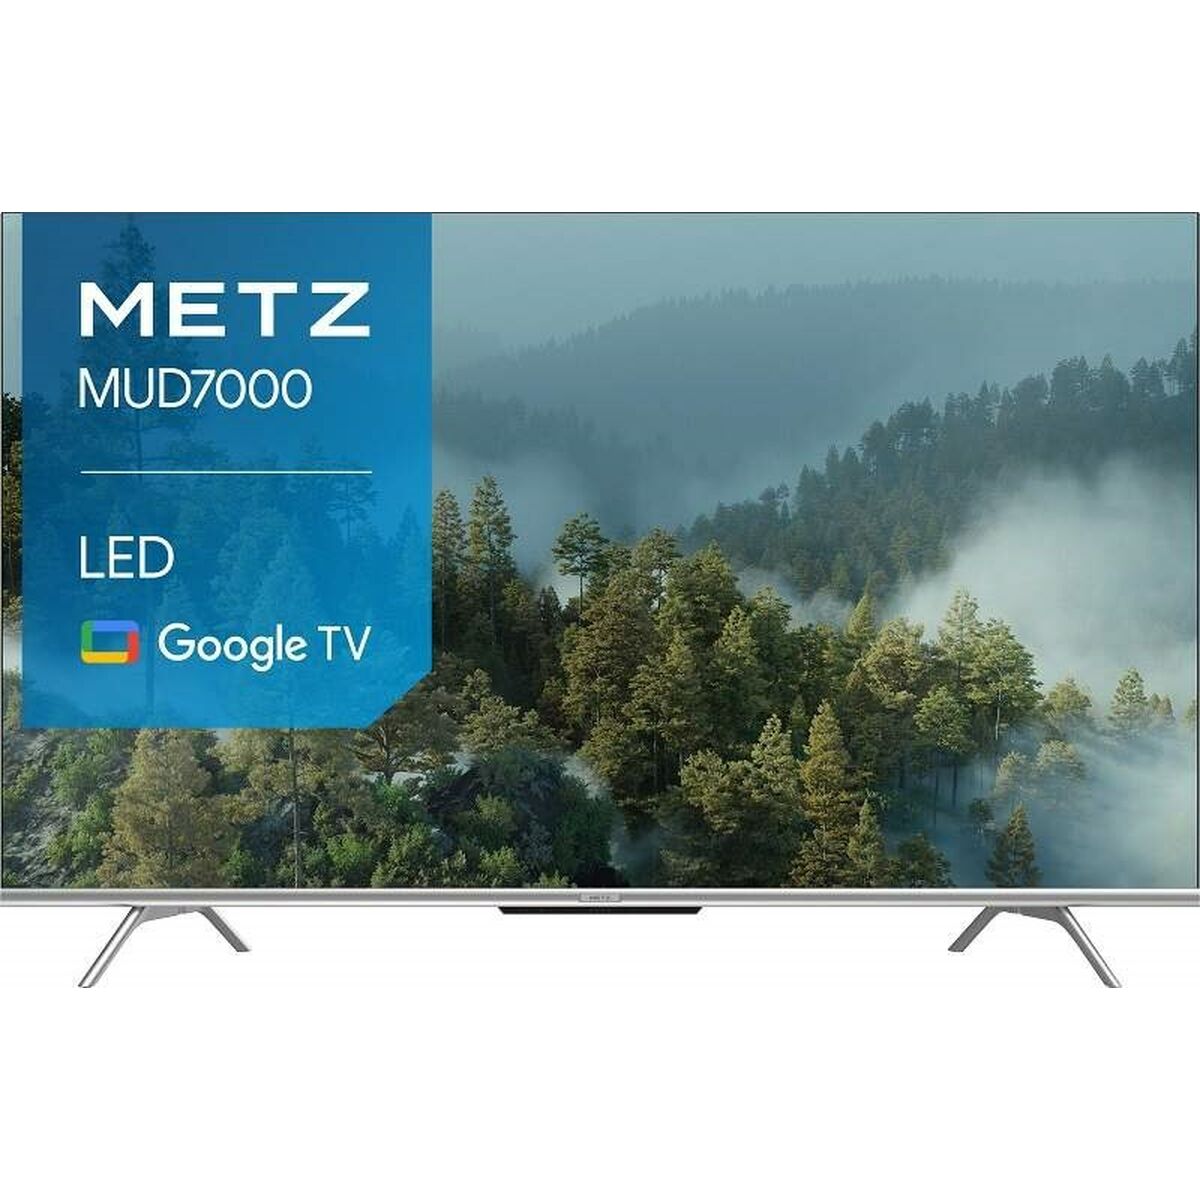 Smart TV Metz 50MUD7000Z 4K Ultra HD 50" LED, Metz, Electronics, TV, Video and home cinema, smart-tv-metz-50mud7000z-4k-ultra-hd-50-led, Brand_Metz, category-reference-2609, category-reference-2625, category-reference-2931, category-reference-t-18805, category-reference-t-18827, category-reference-t-19653, cinema and television, Condition_NEW, entertainment, Price_300 - 400, UEFA Euro 2020, RiotNook